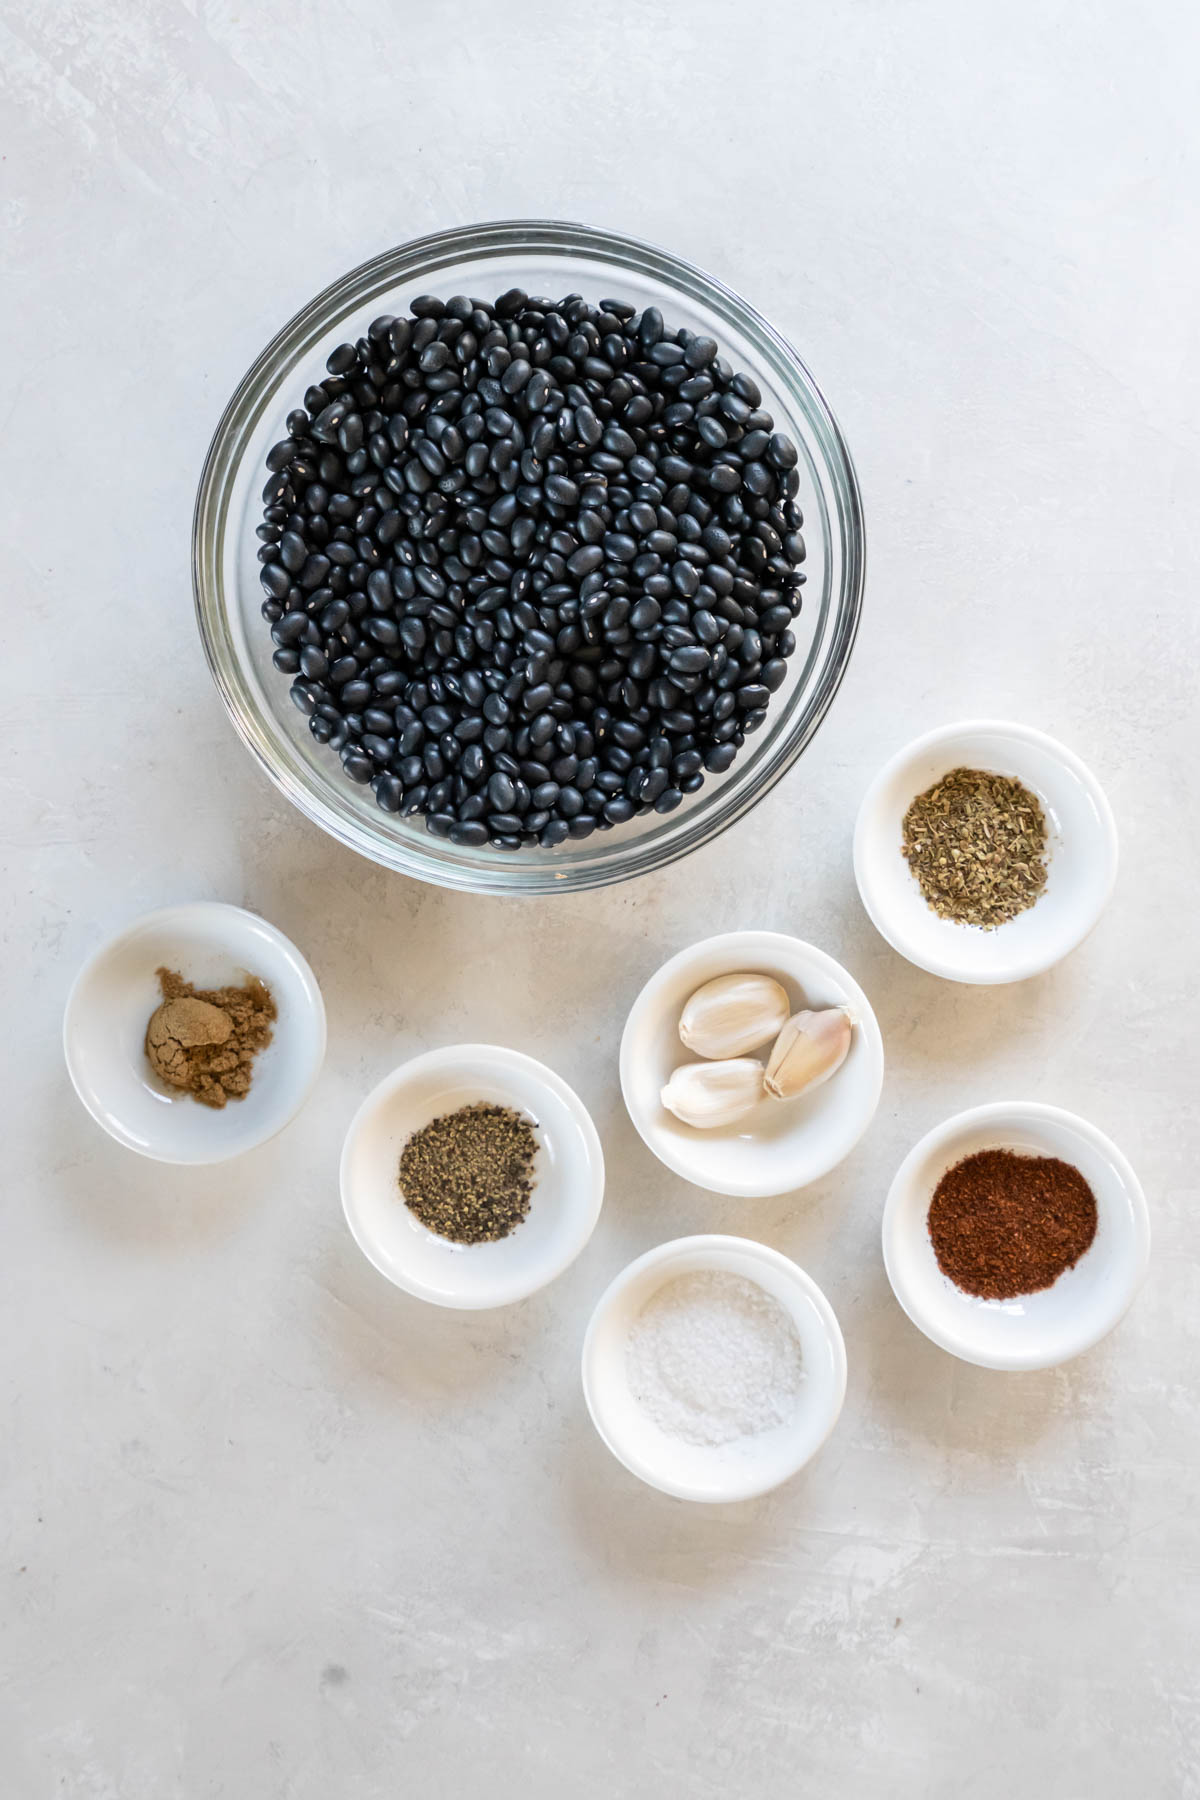 Ingredients for cooking black beans from scratch.